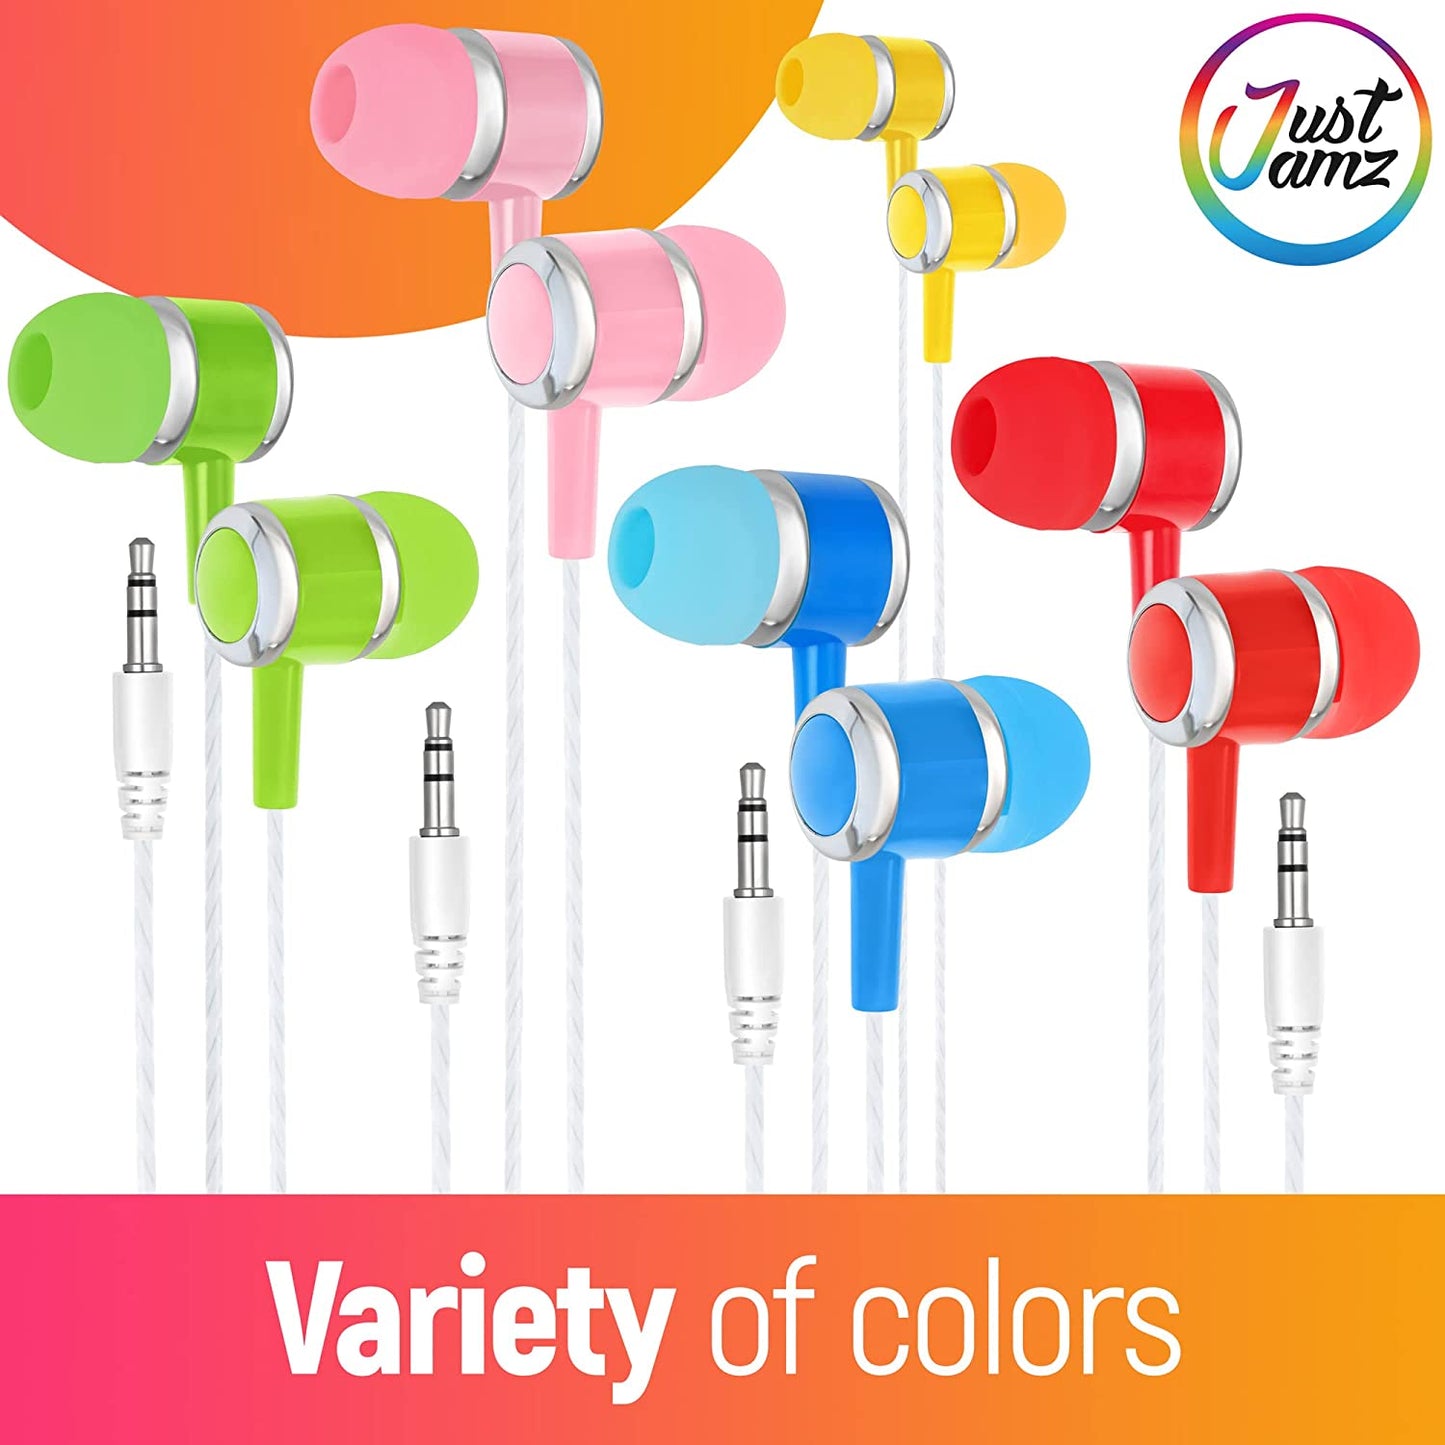 100 Pack of JustJamz Marbles, Colorful Earbuds, 3.5mm Jack, Assorted Colors (United States)